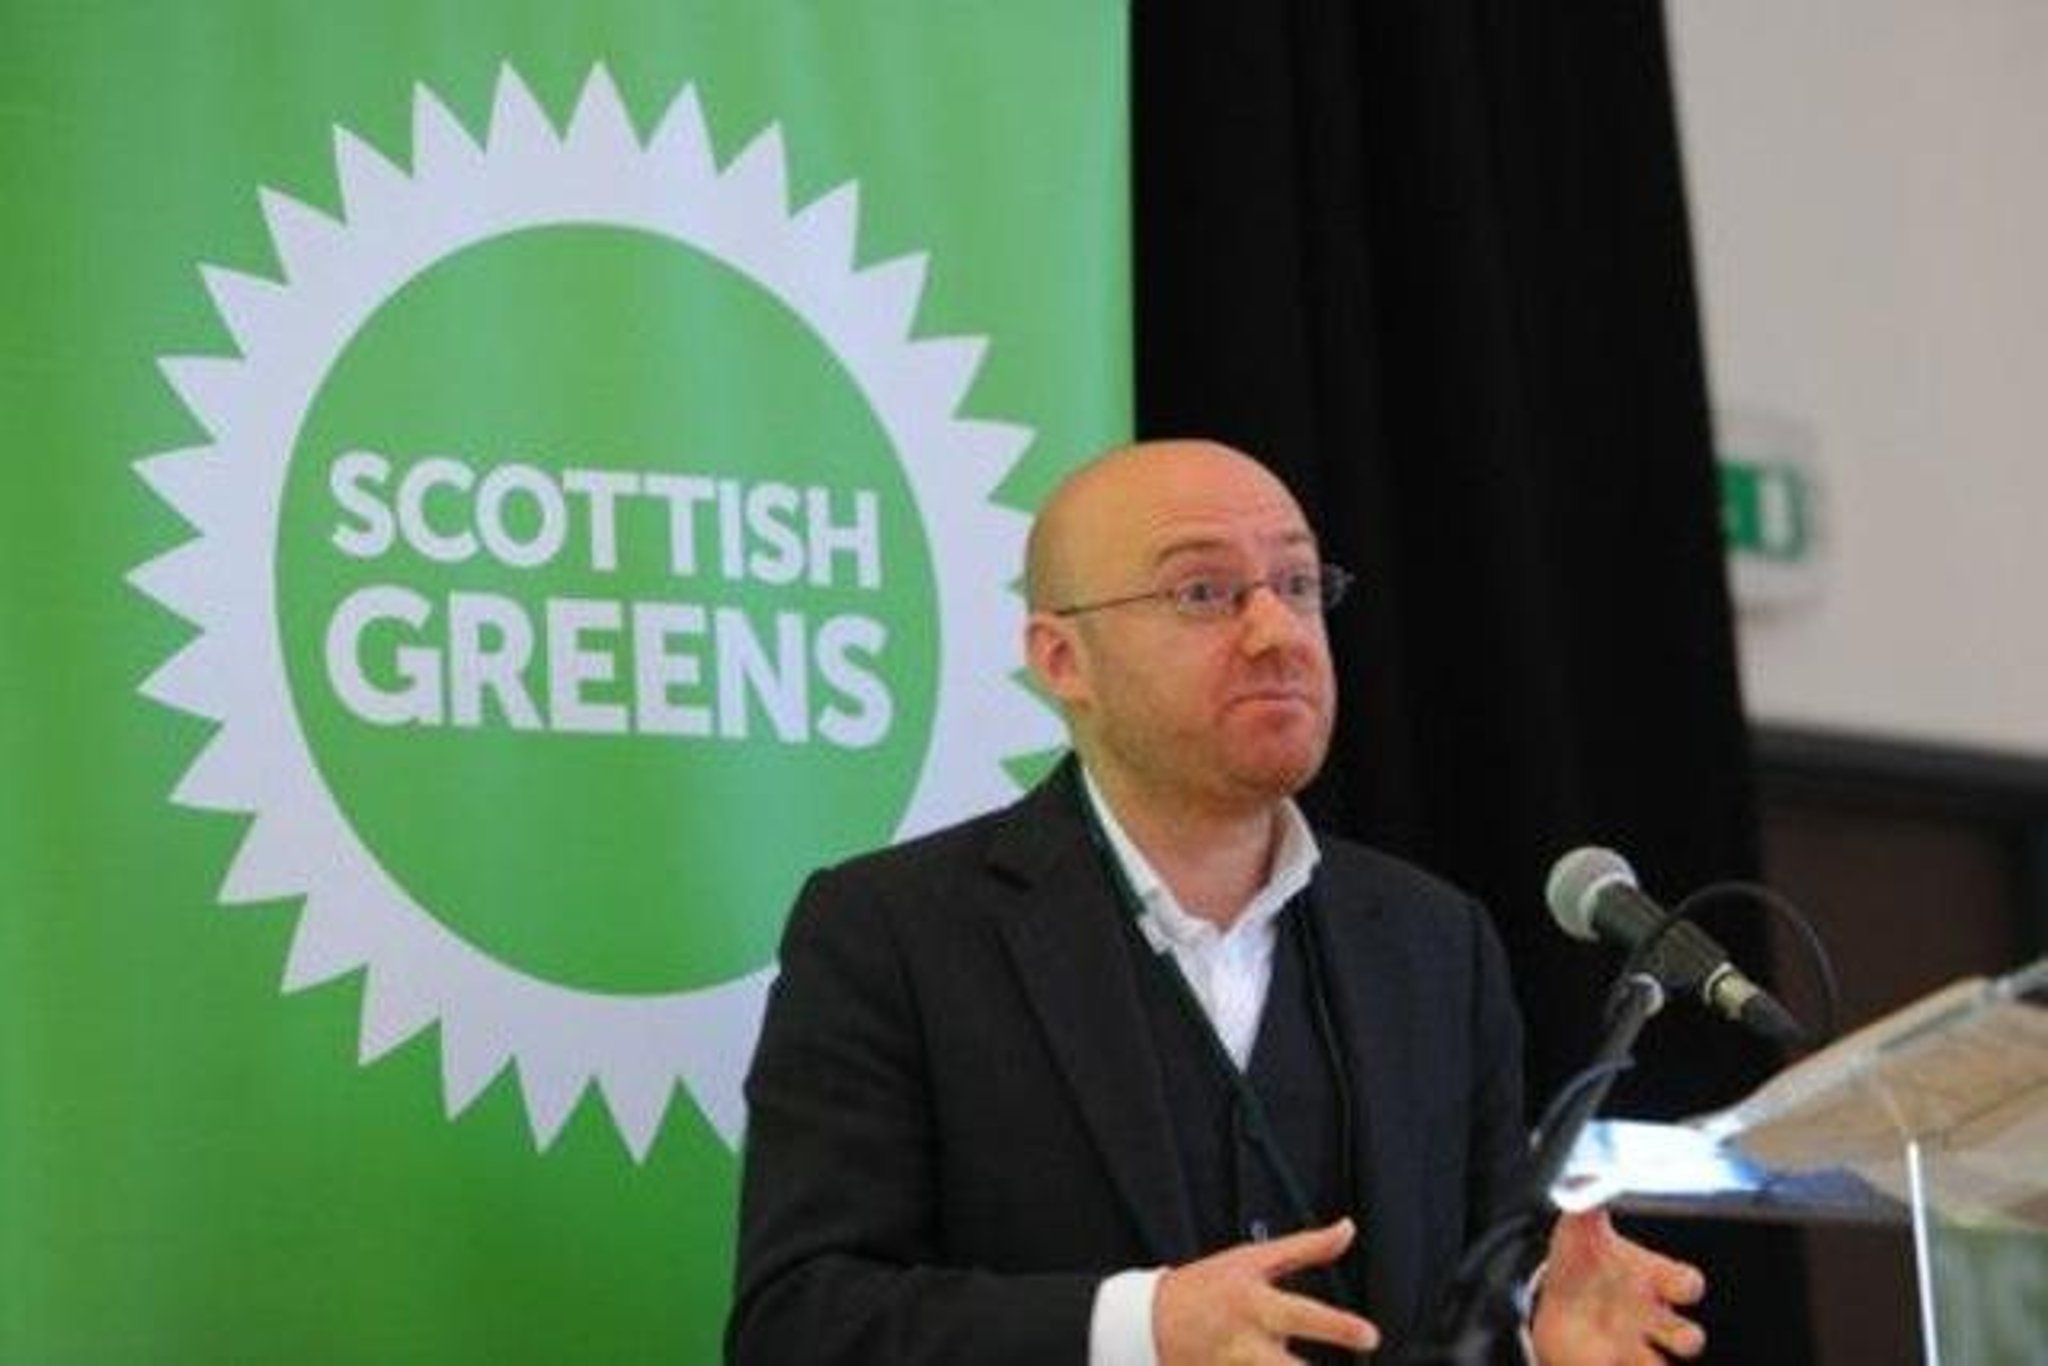 'Electoral deceit': Ballot paper confusion may have cost us seats, fume Scottish Greens